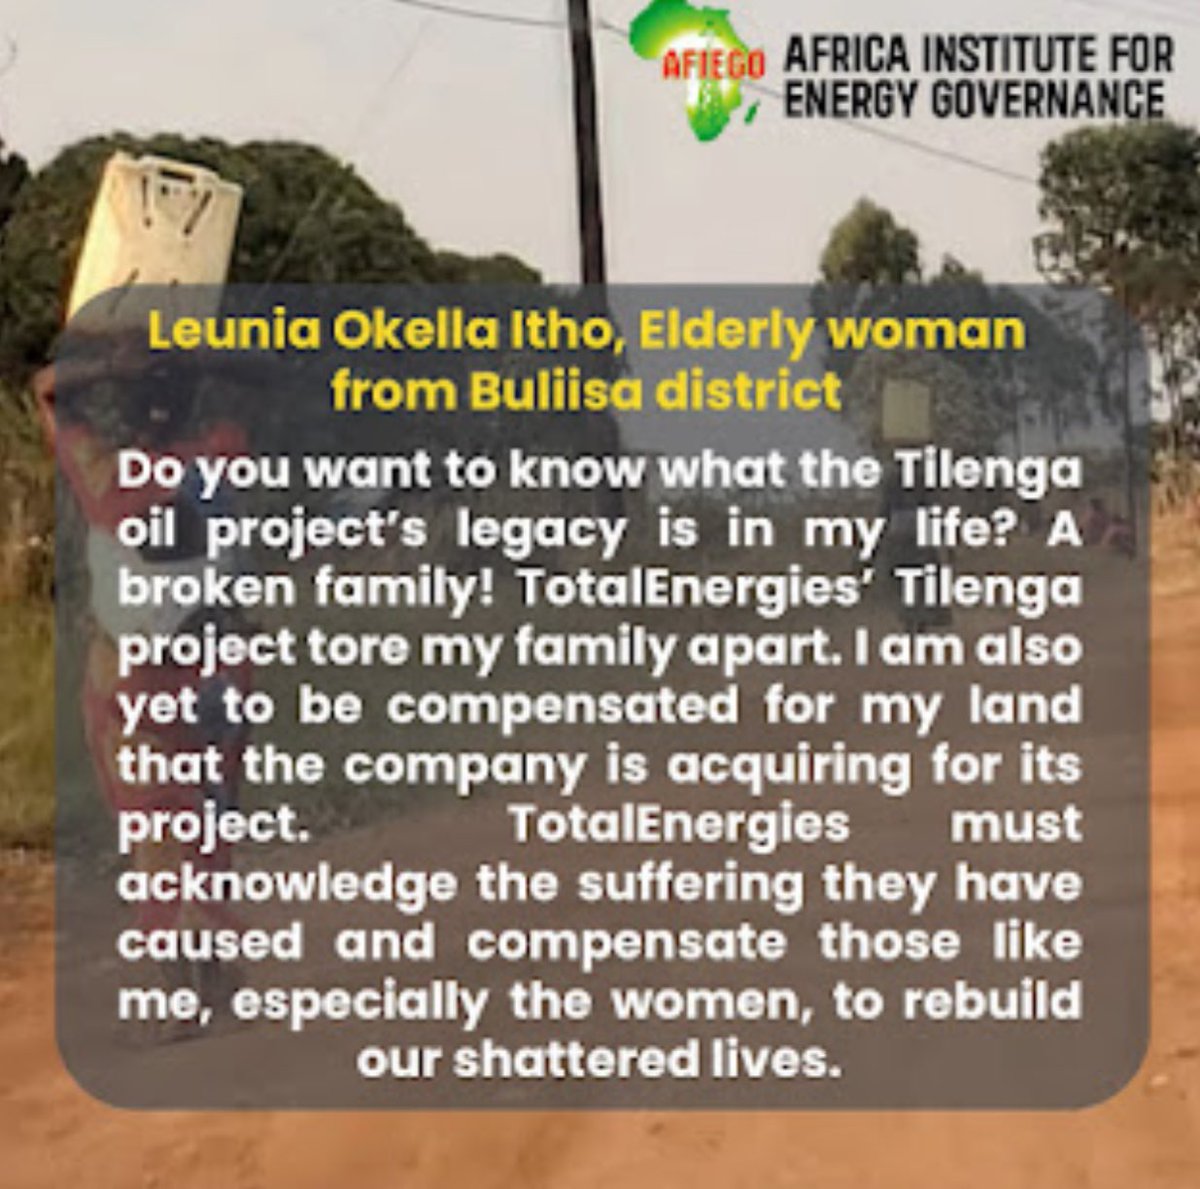 A broken family! That is the legacy of @TotalEnergiesUG’s Tilenga oil project in my life.  I'm also still uncompensated for my land. Read more of my story: afiego.org/wp-content/upl…  #StopEACOP @AfiegoUg @stopEACOP